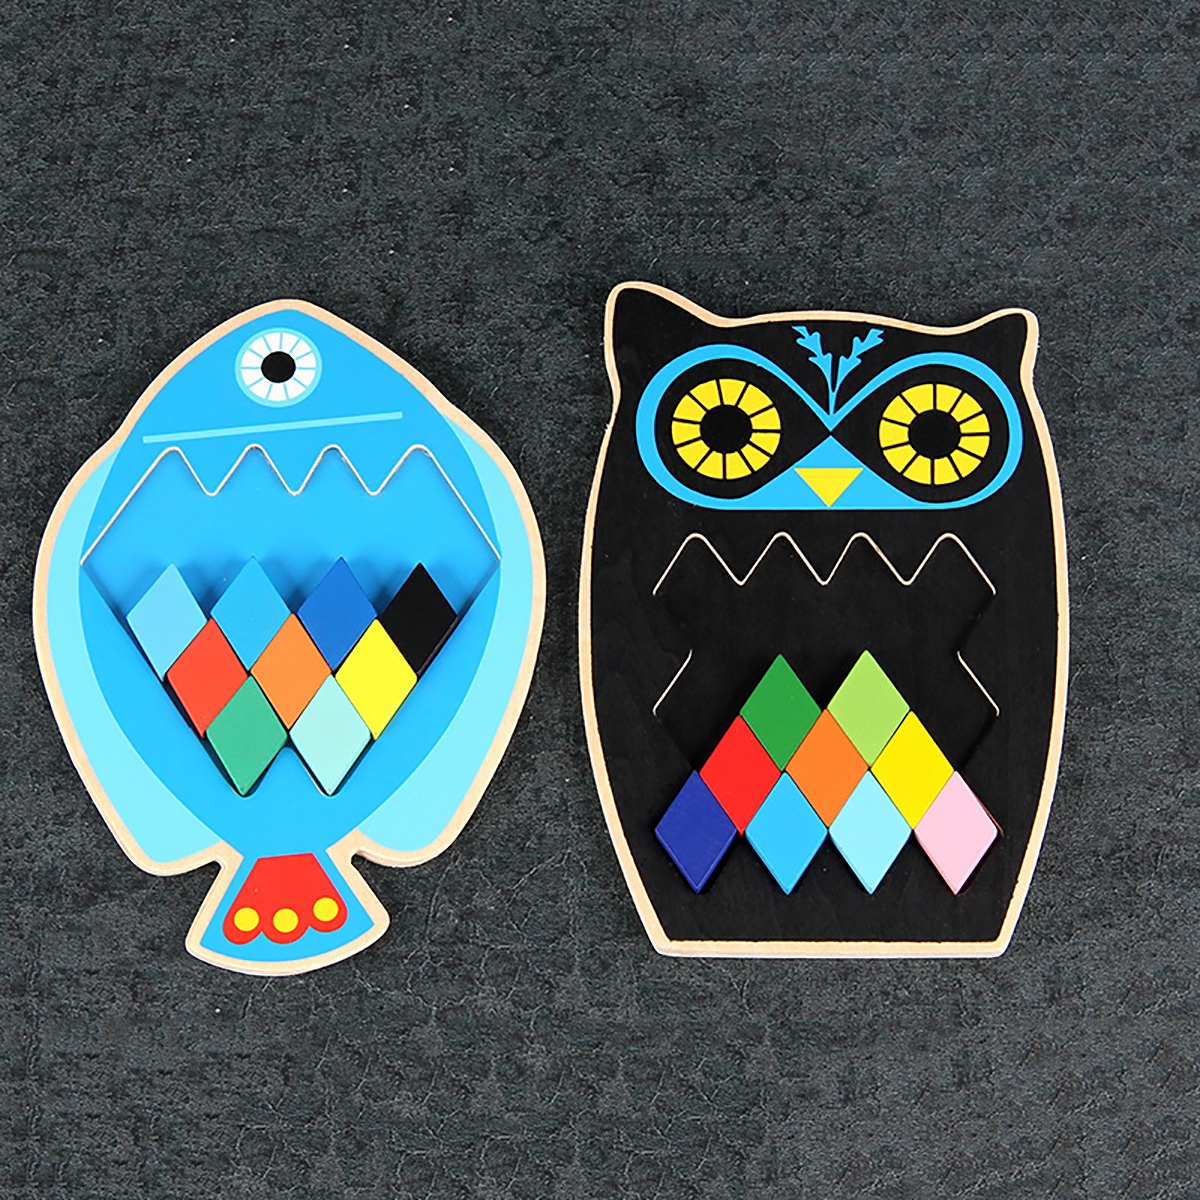 Wood DIY Assembly Jigsaw Puzzle Toy Colors Shapes Cartoon Fish Owl Matching Cards Toy for Children Learning - Photo: 1